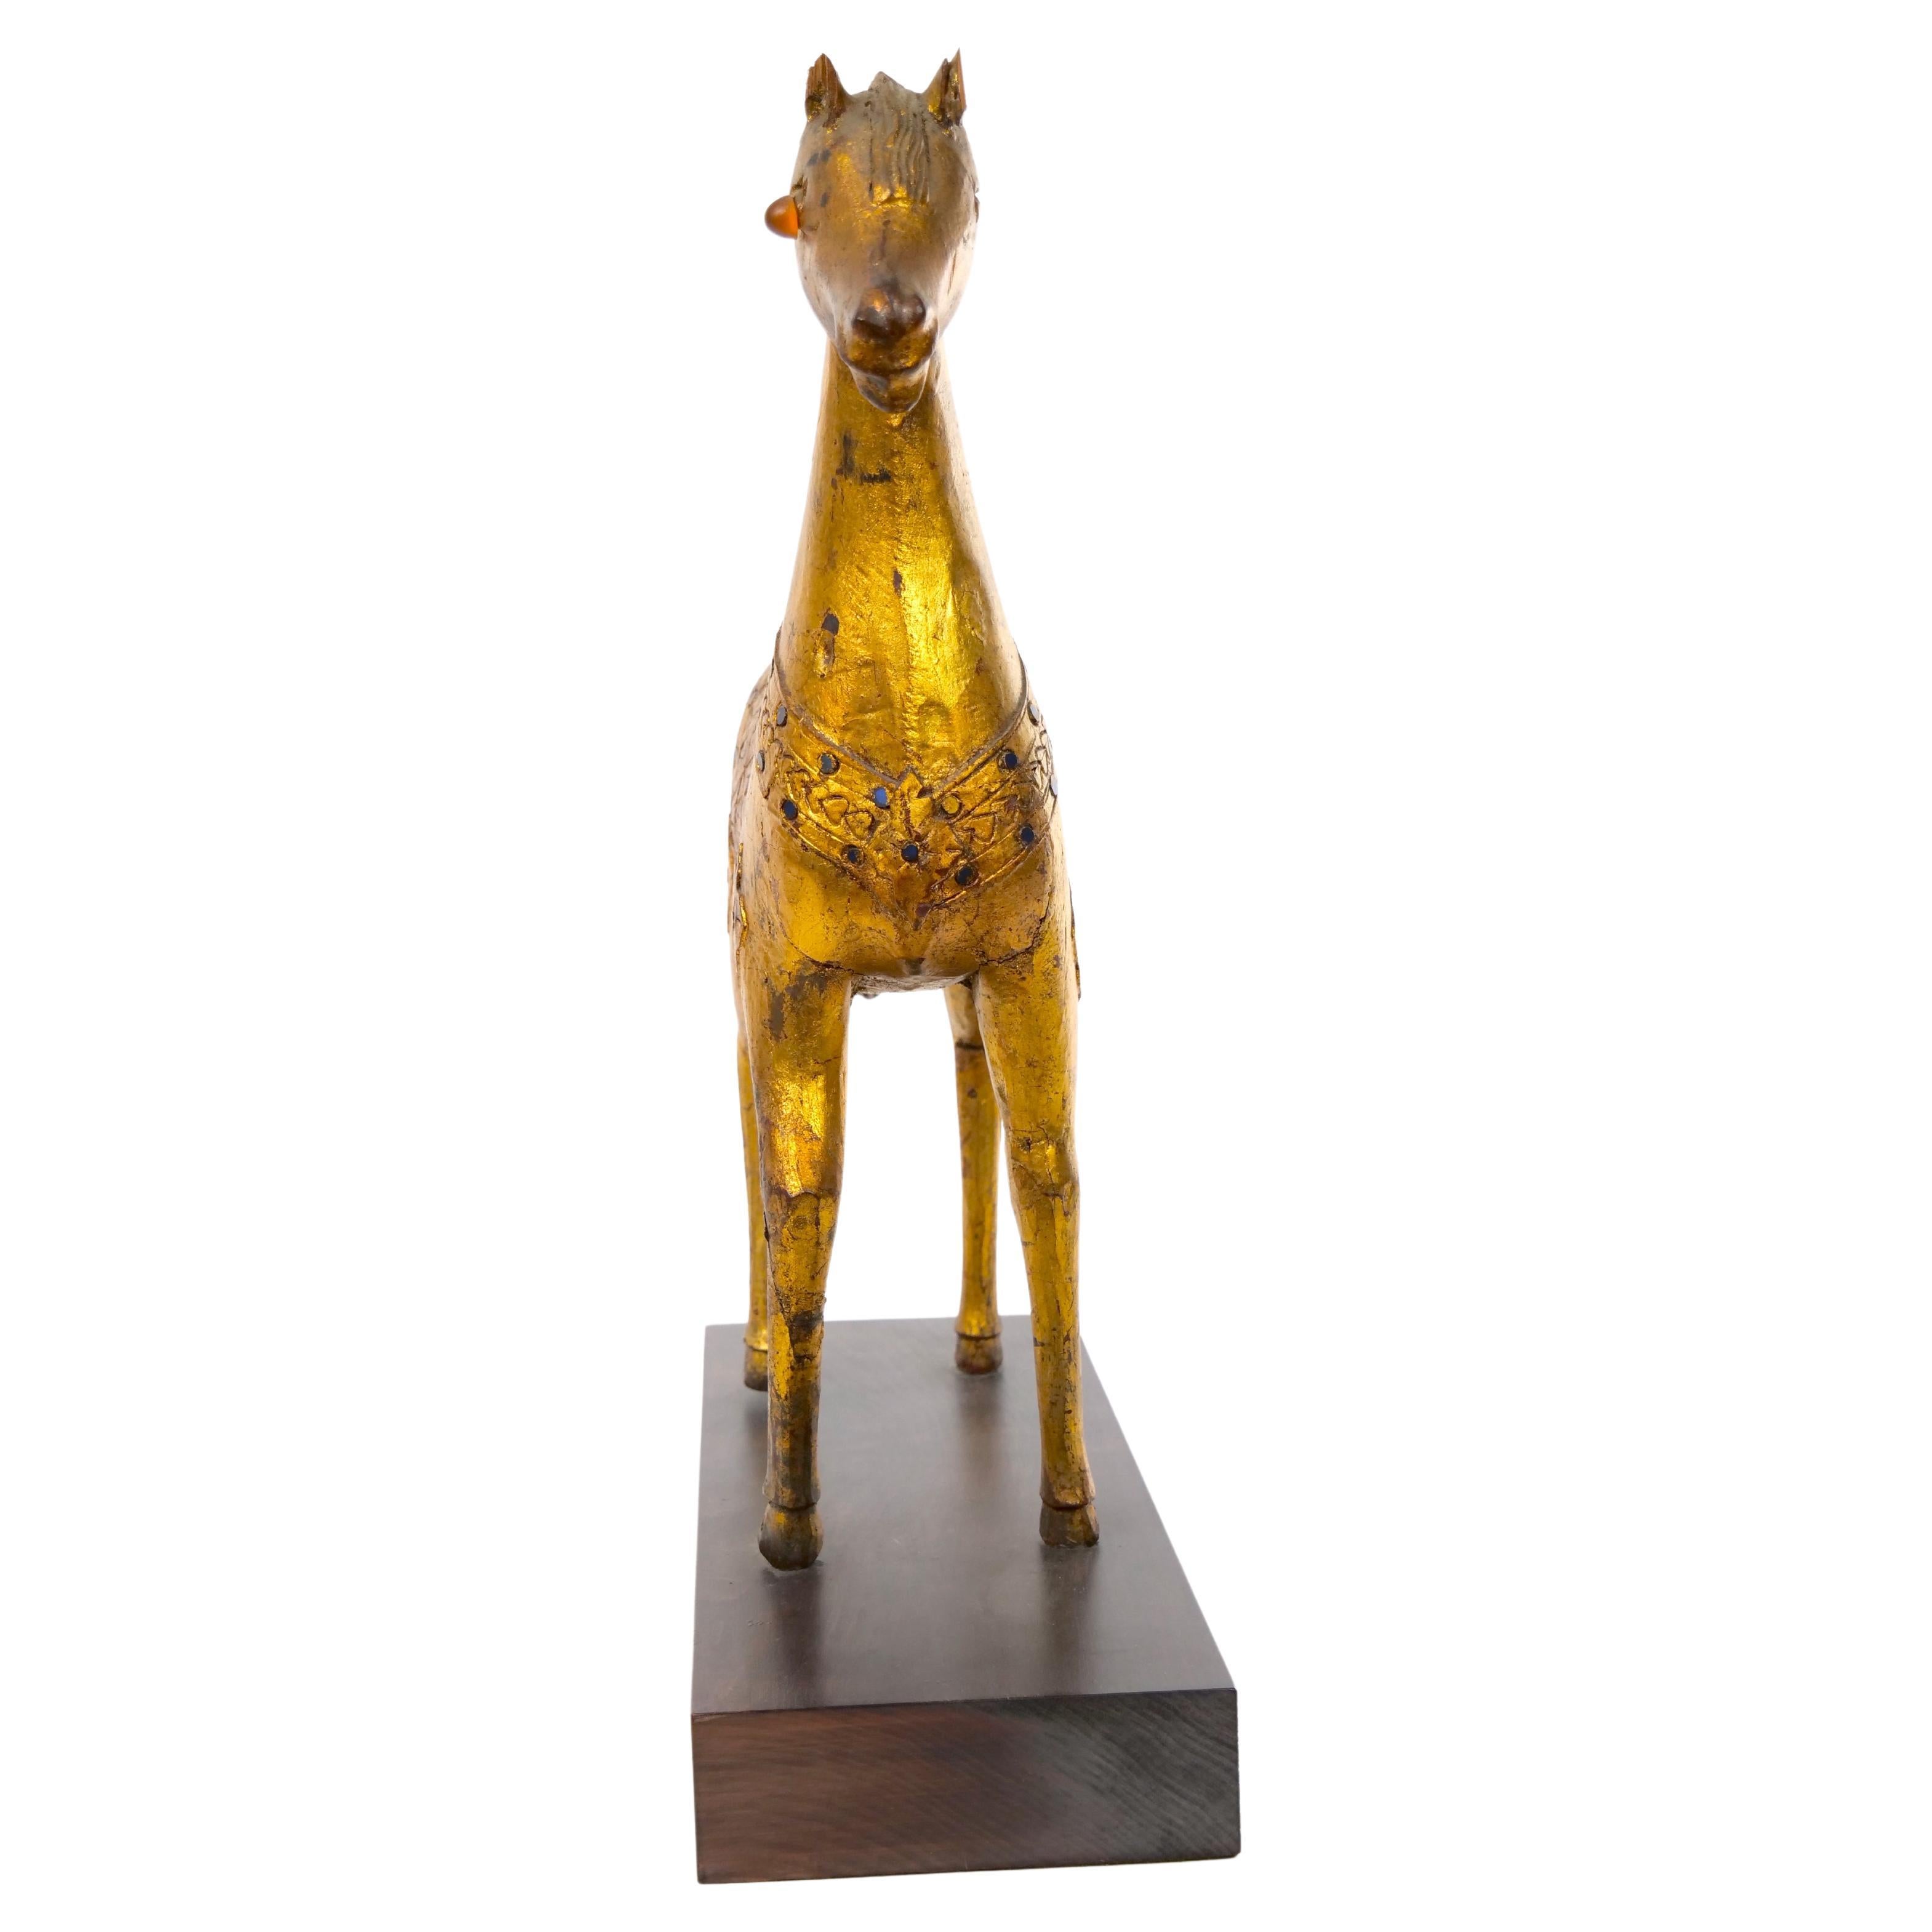 Large hand carved gilt gold wood animal sculpture horse figure with full gold leaf veneer. Intricate design and lovely patina. The decorative piece is in good condition with imperfections and minor losses to gilt consistent with age (see photos). It